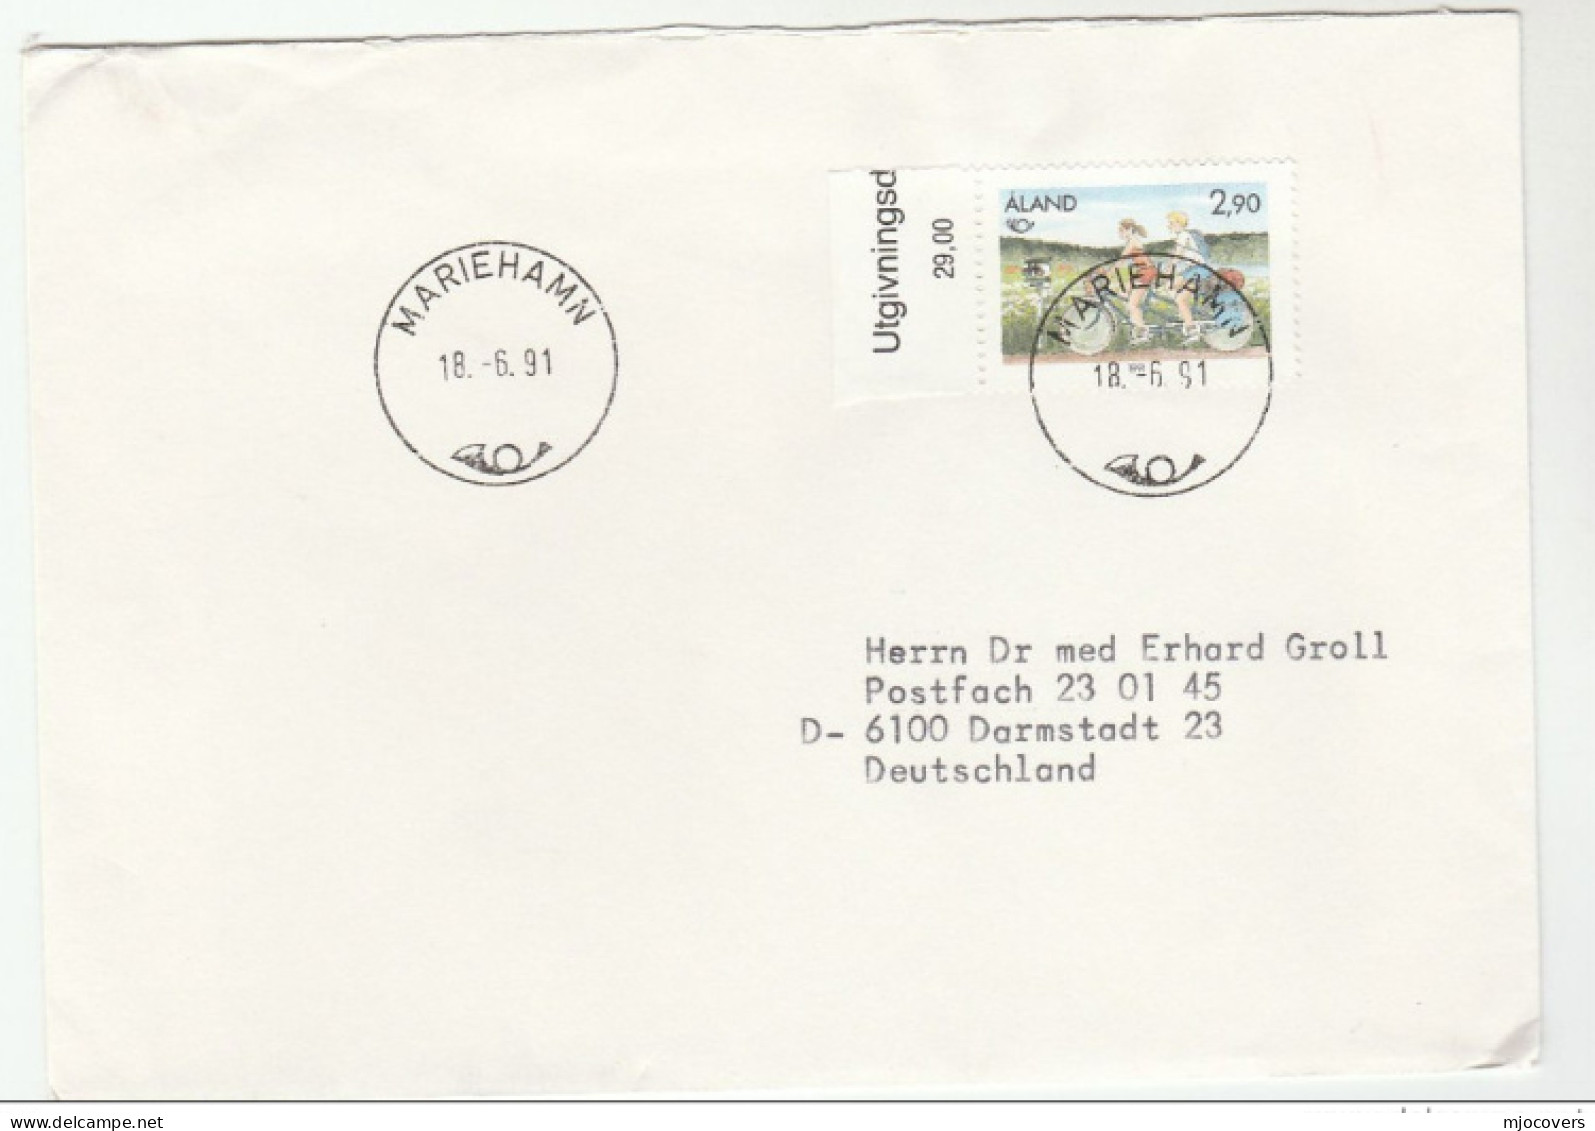 CYCLING Mariehamn ALAND Cover To Germany Bike Bicycle 1991 Stamps - Radsport